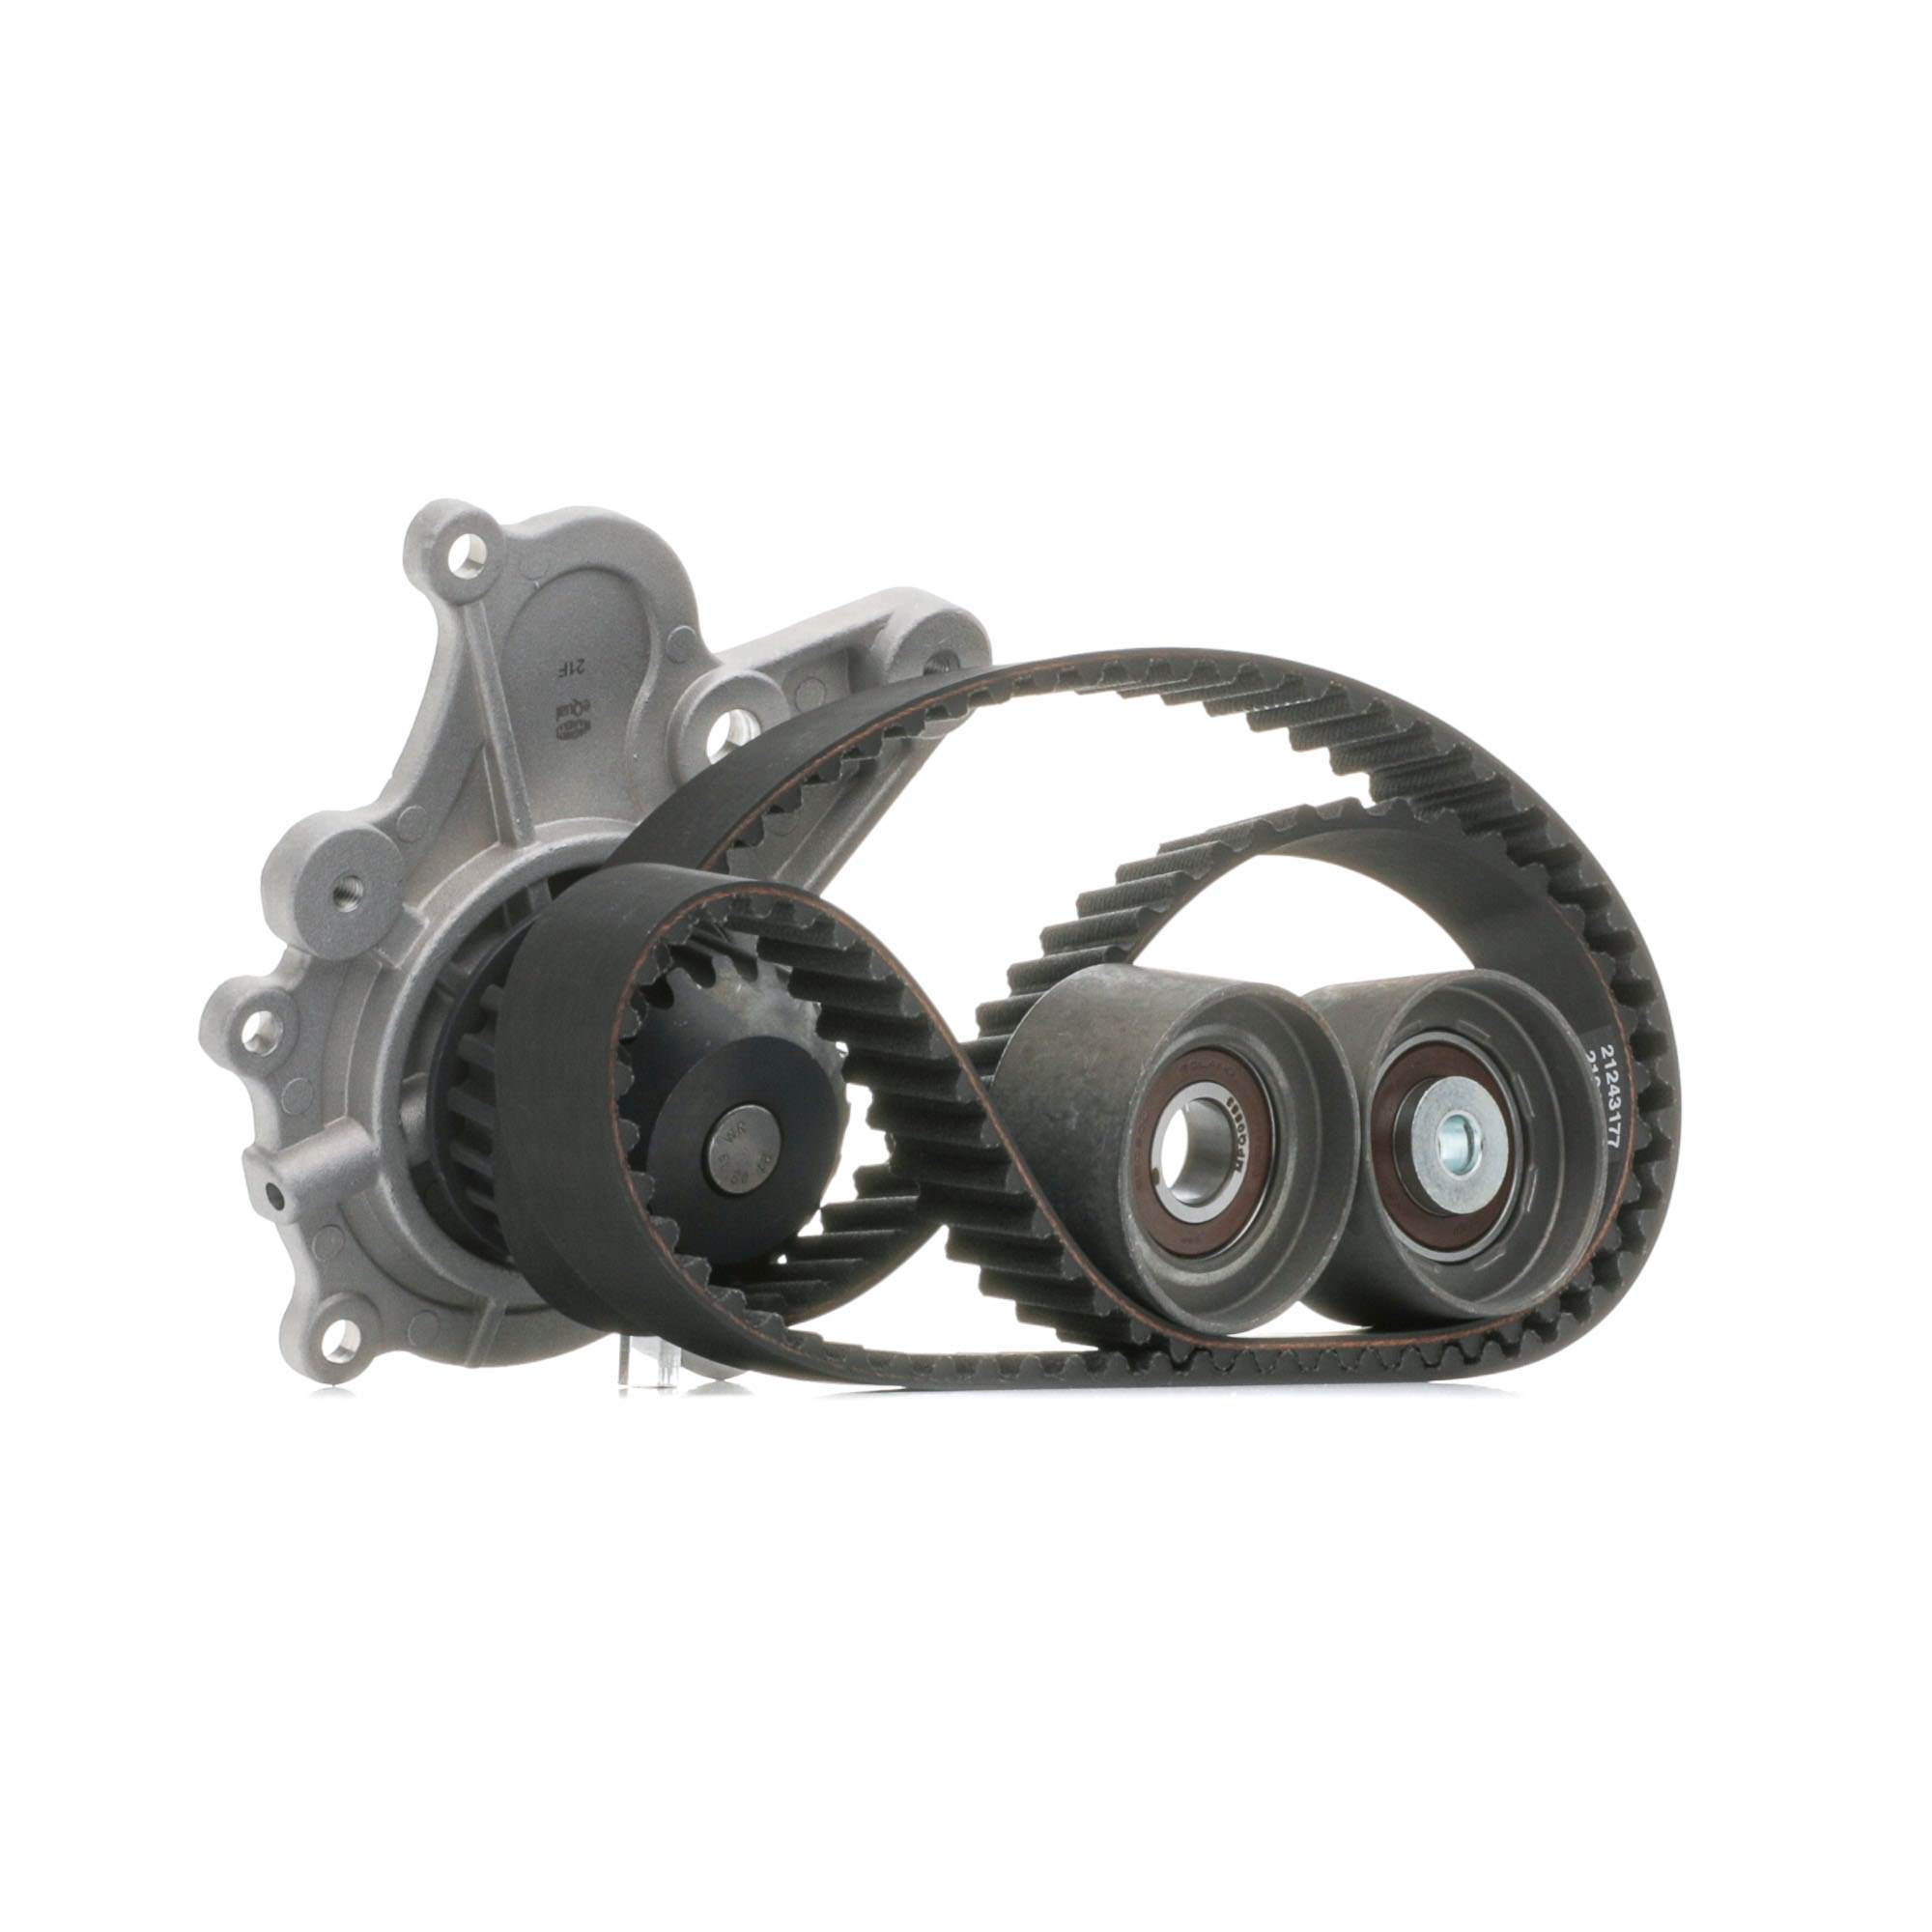 MAGNETI MARELLI 132011160071 Water pump and timing belt kit Number of Teeth: 123 L: 1172 mm, Width: 28 mm